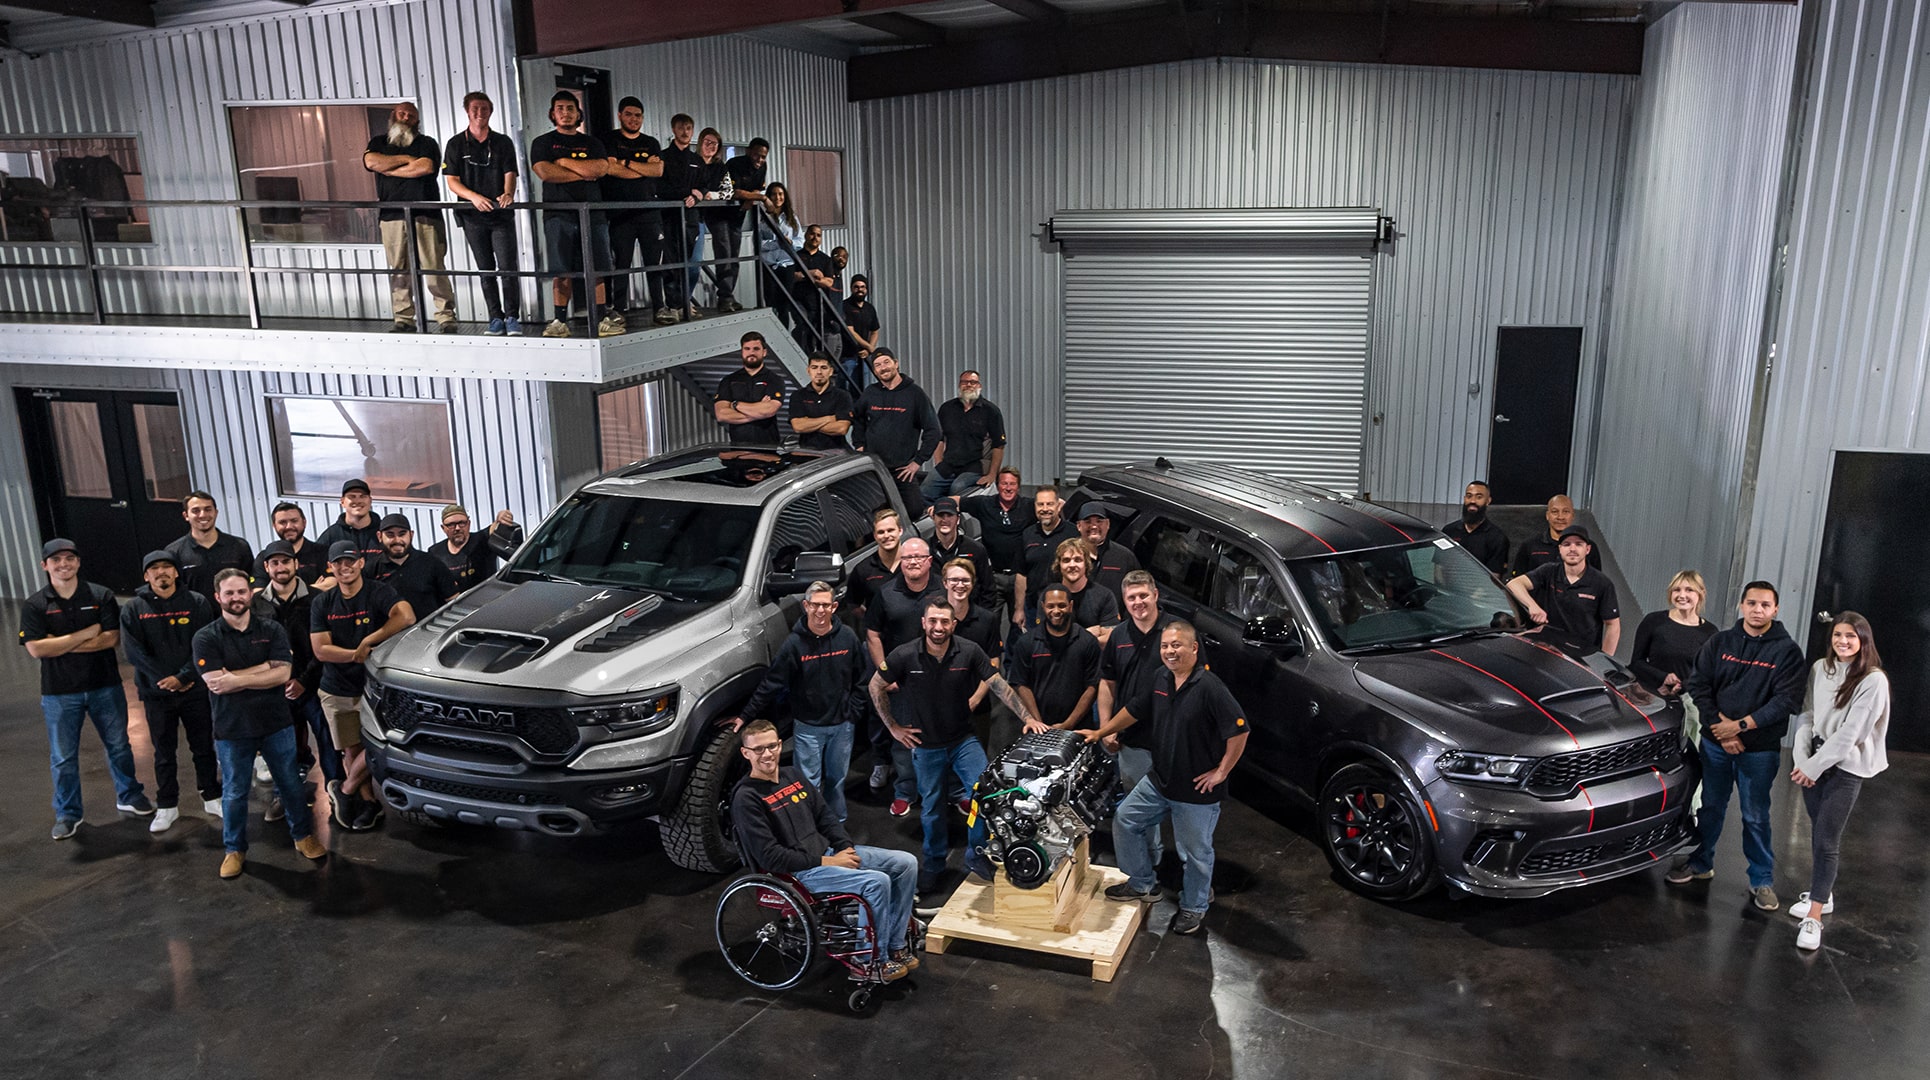 The Hennessey Performance team. Source: http://hennesseyperformance.com/about/who-we-are/